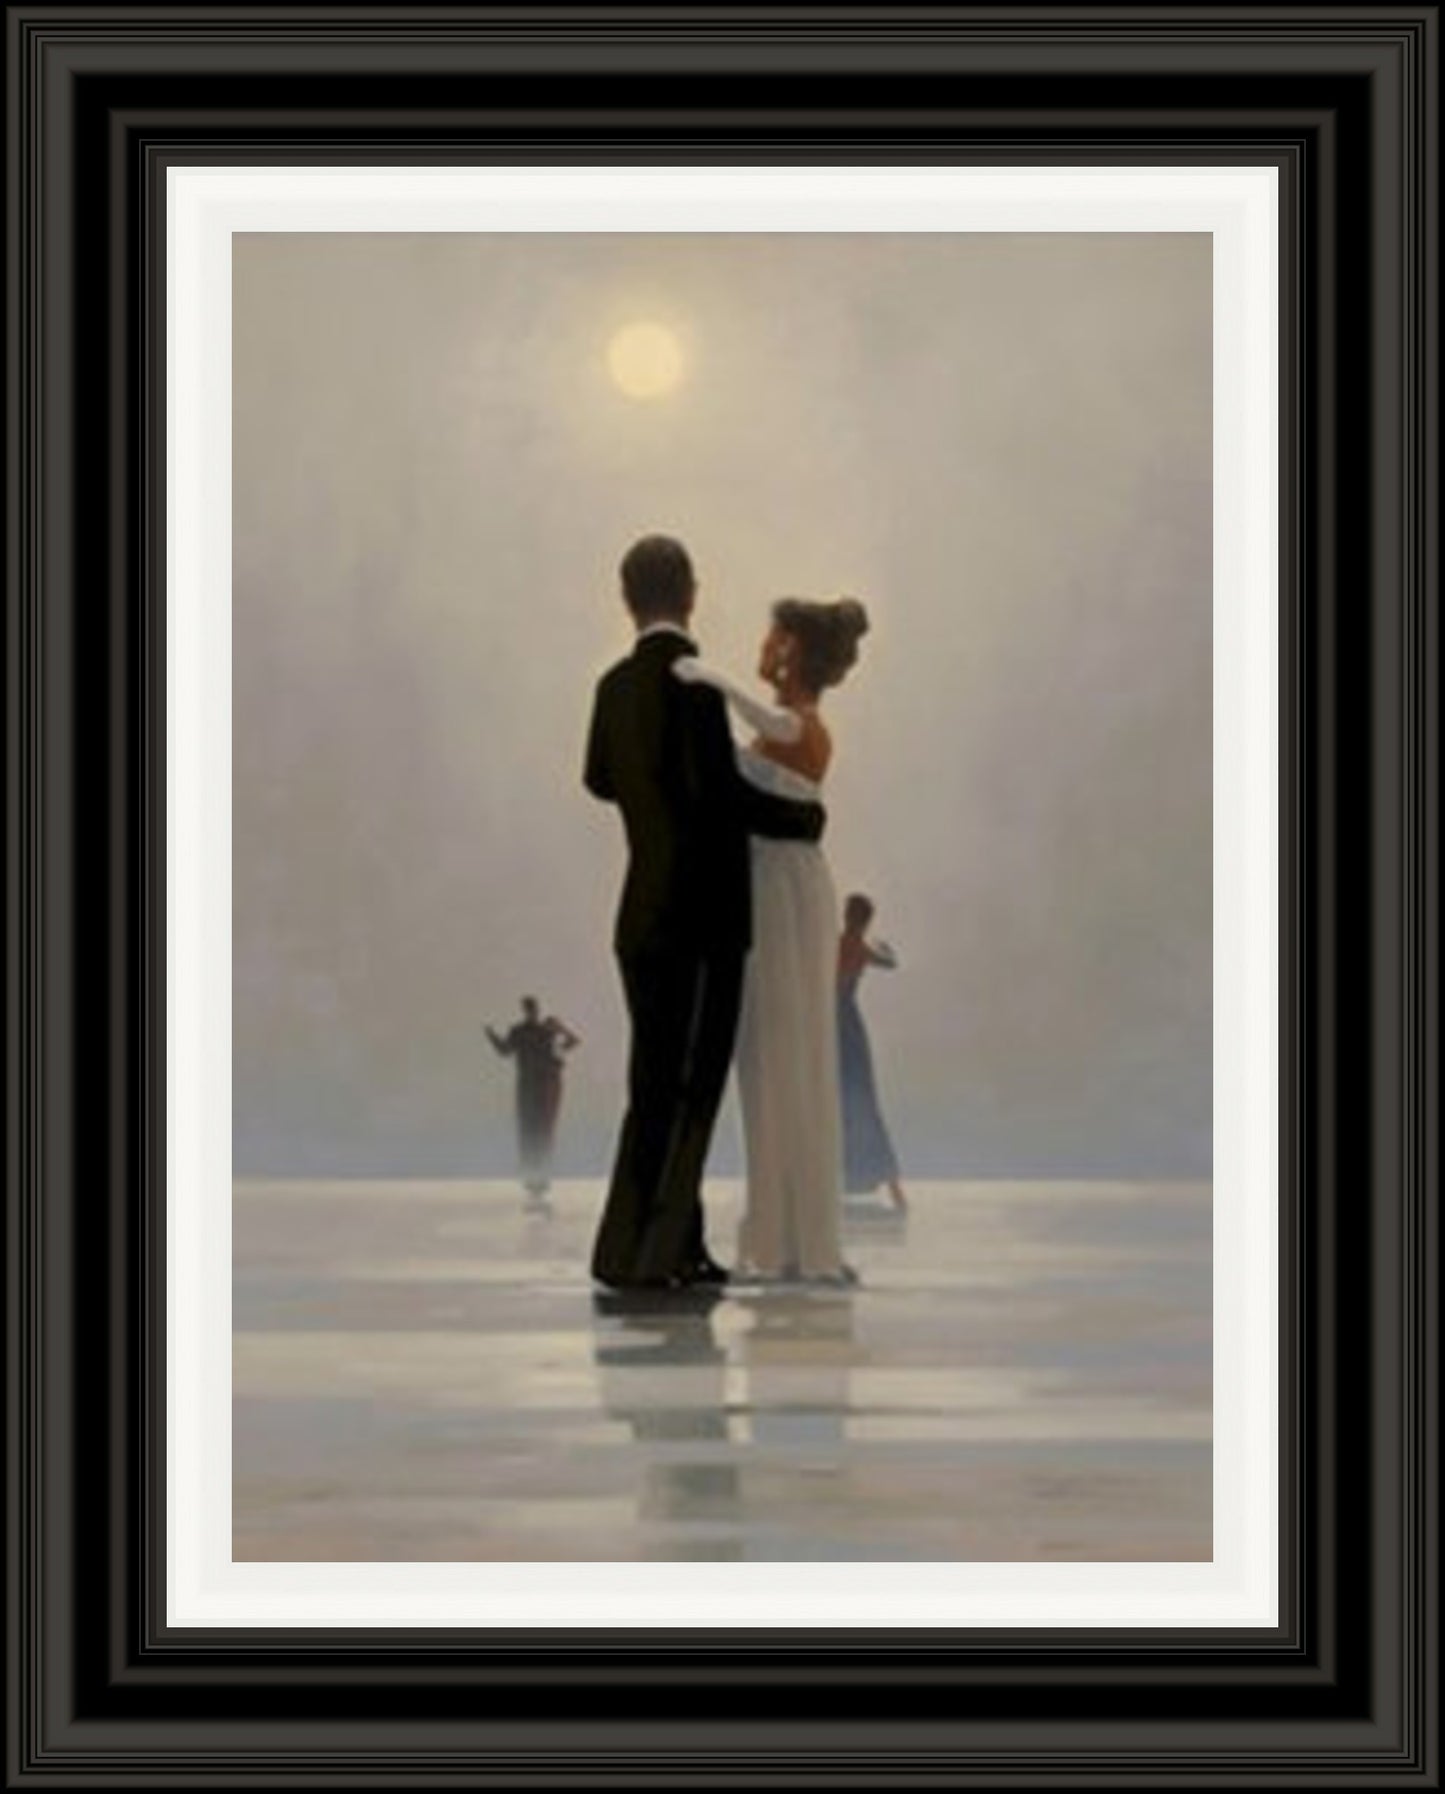 Dance Me to the End of Love by Jack Vettriano